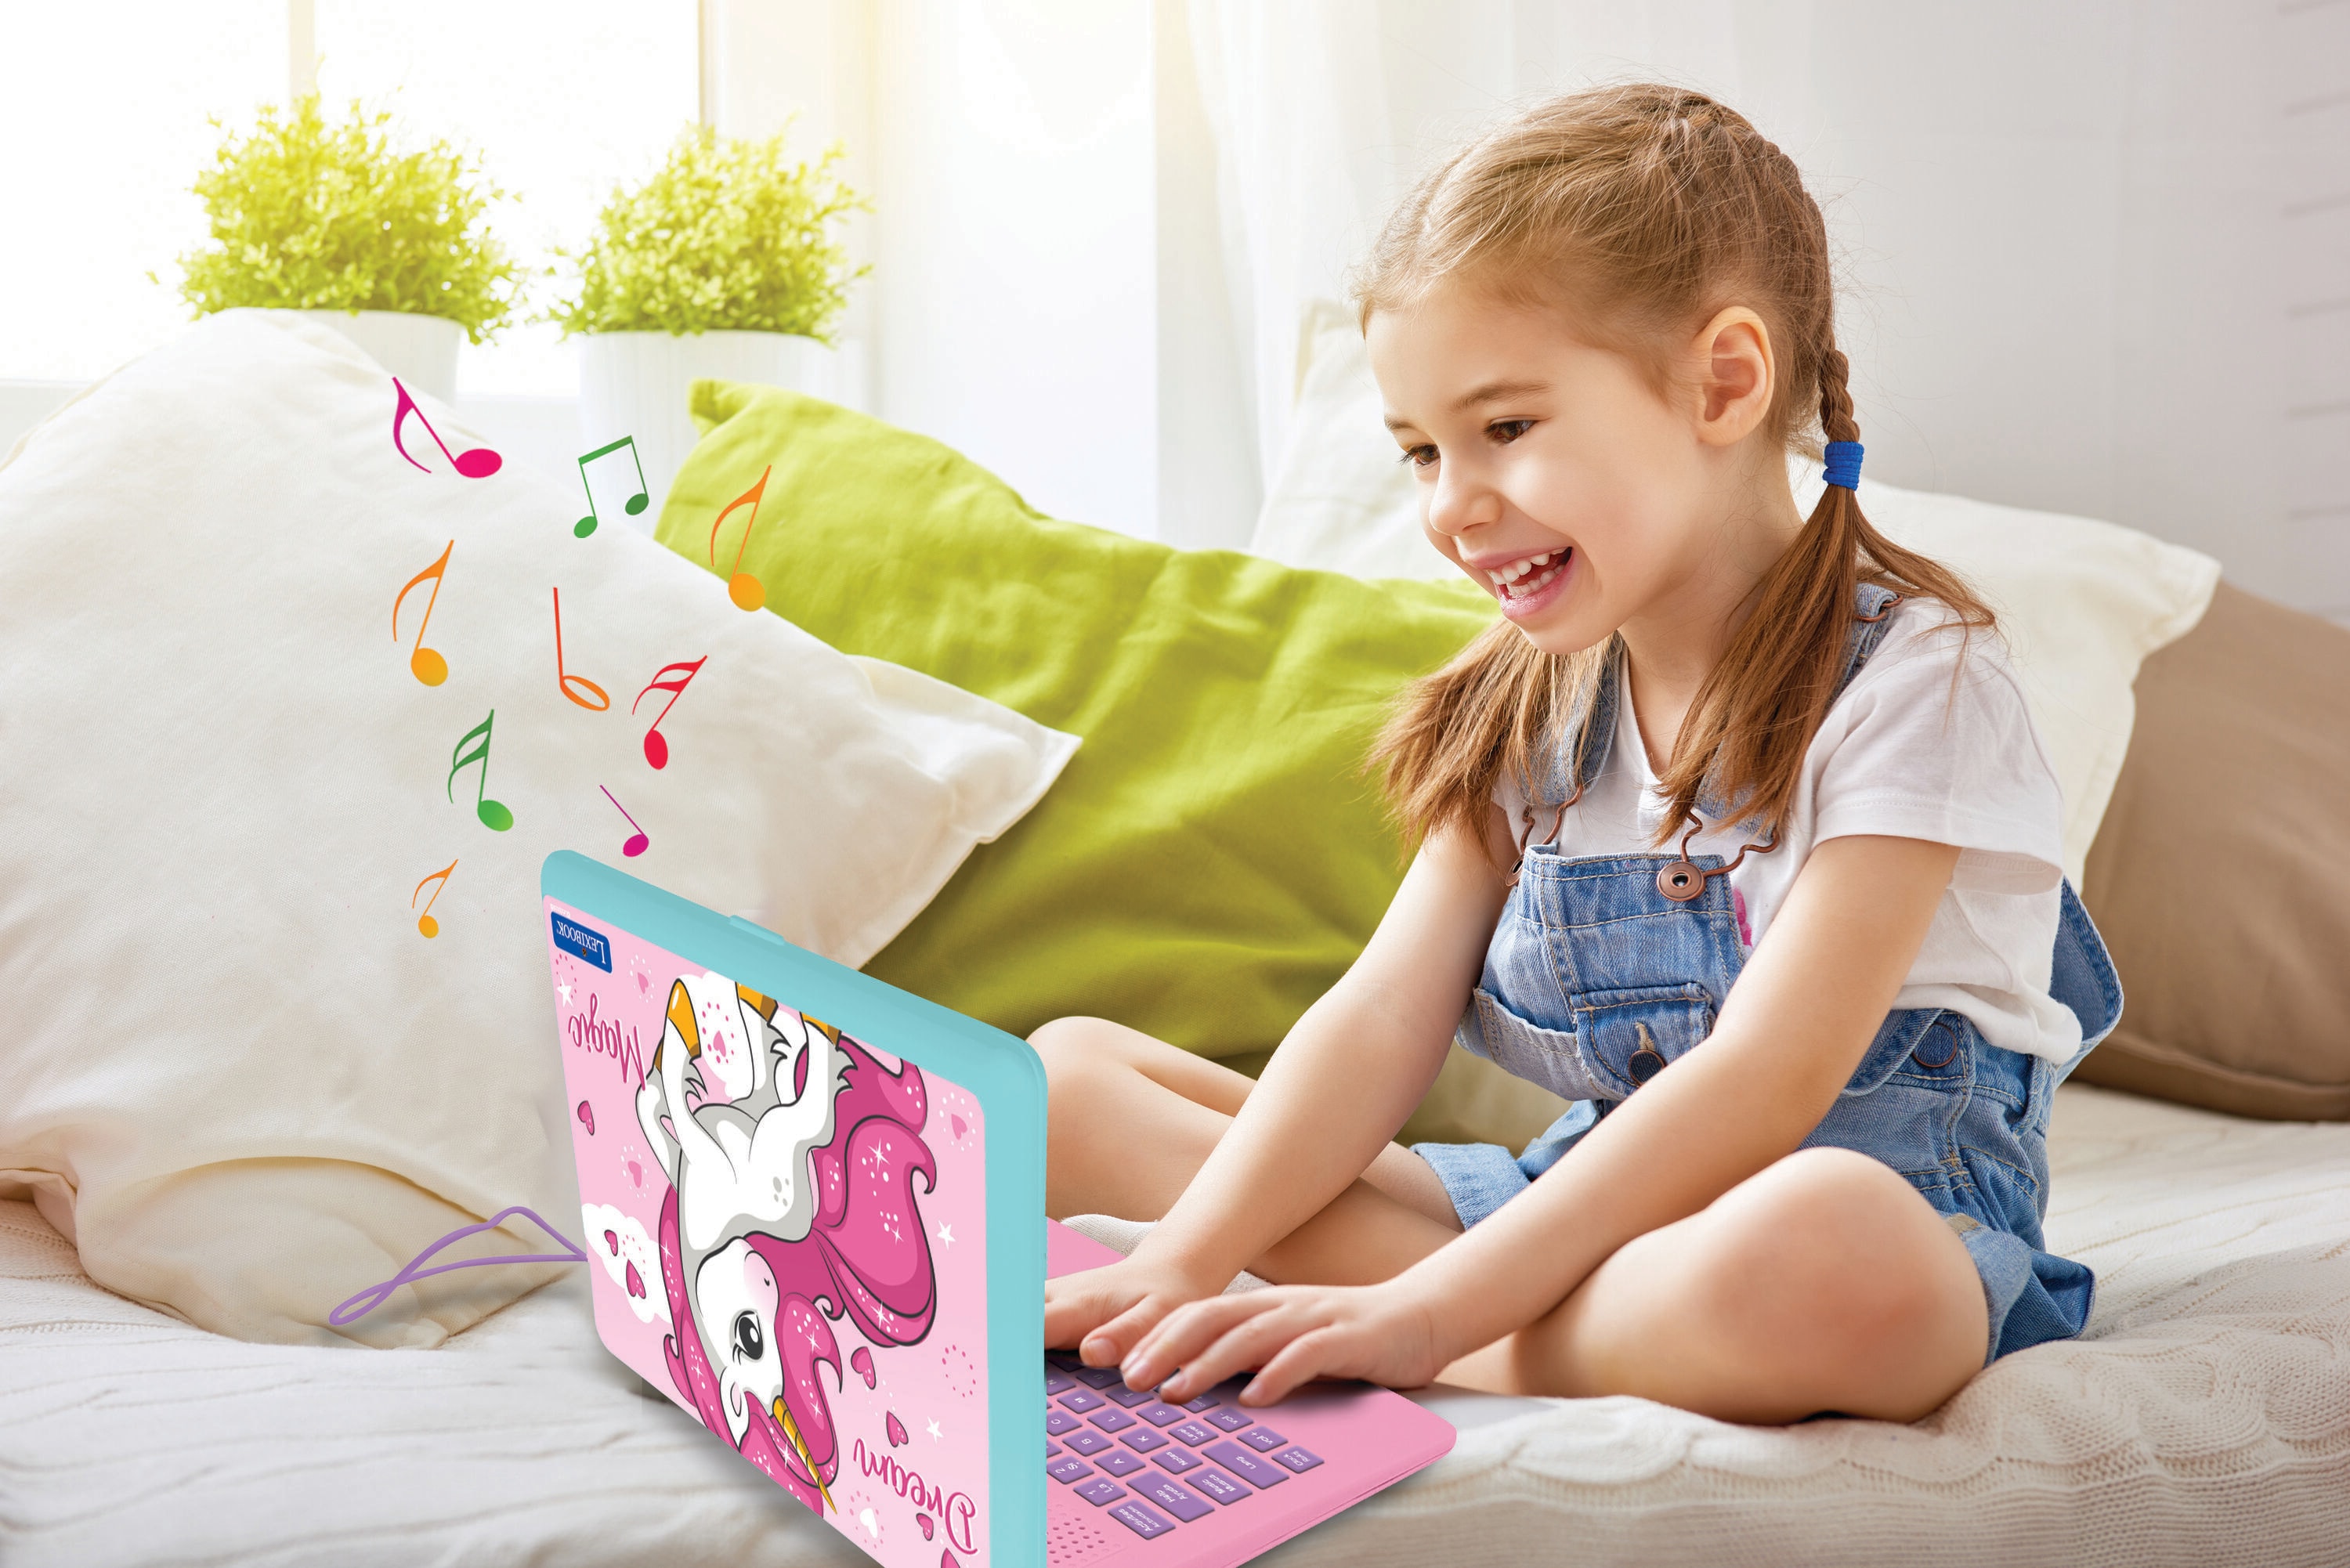 LEXIBOOK Electronic Educational Toy (Charger Included) in the Kids Play  Toys department at